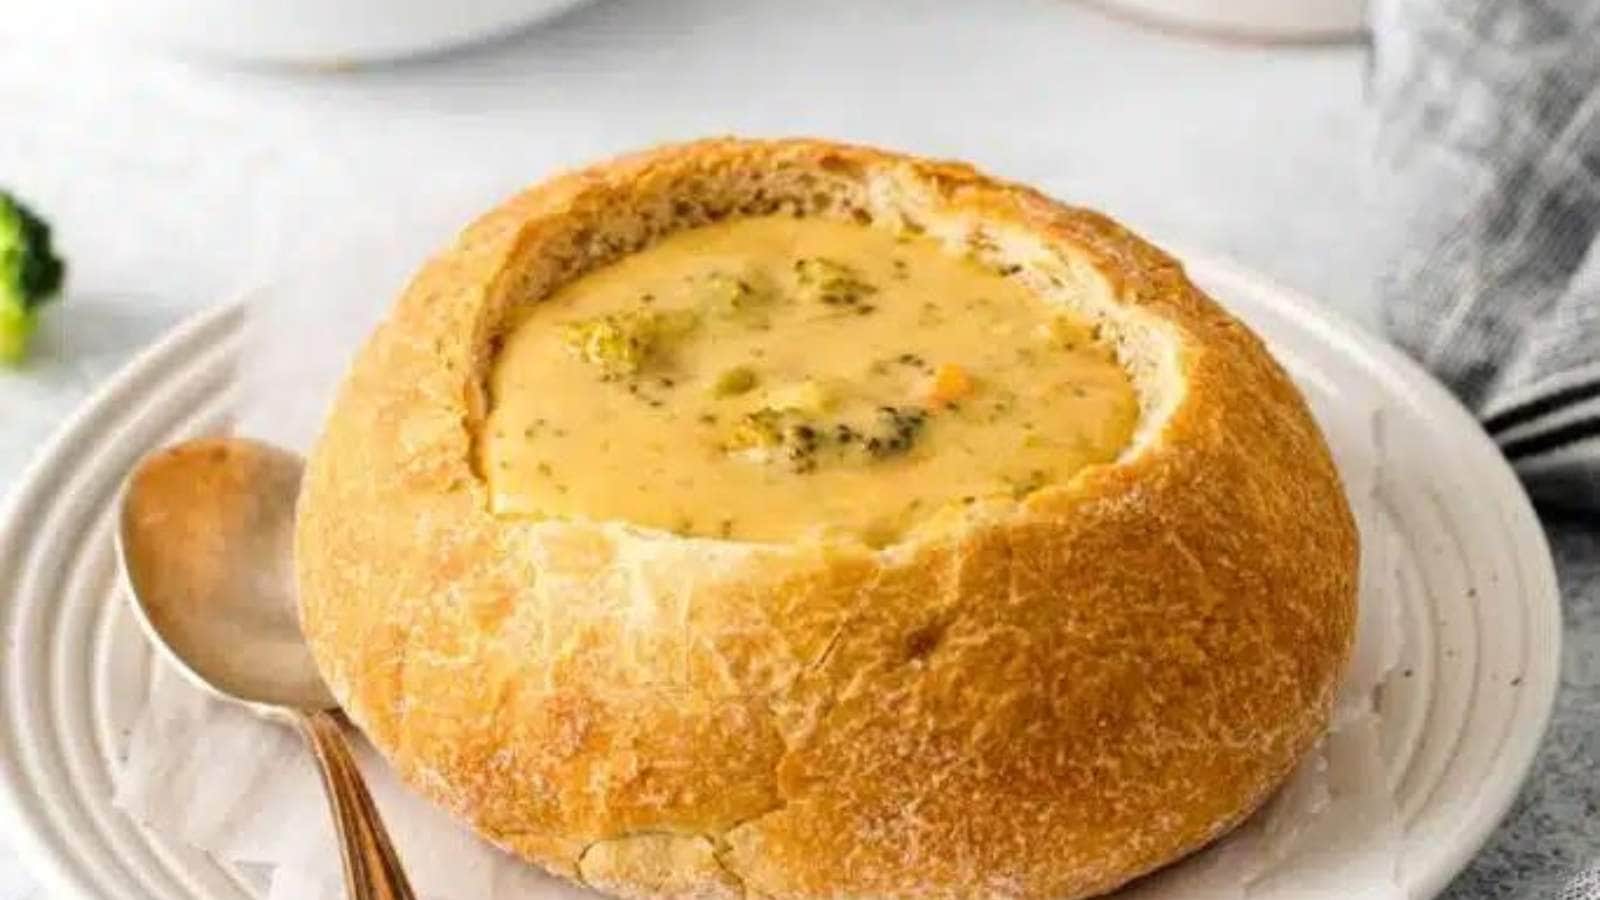 Broccoli Cheddar Soup recipe by Confetti And Bliss.